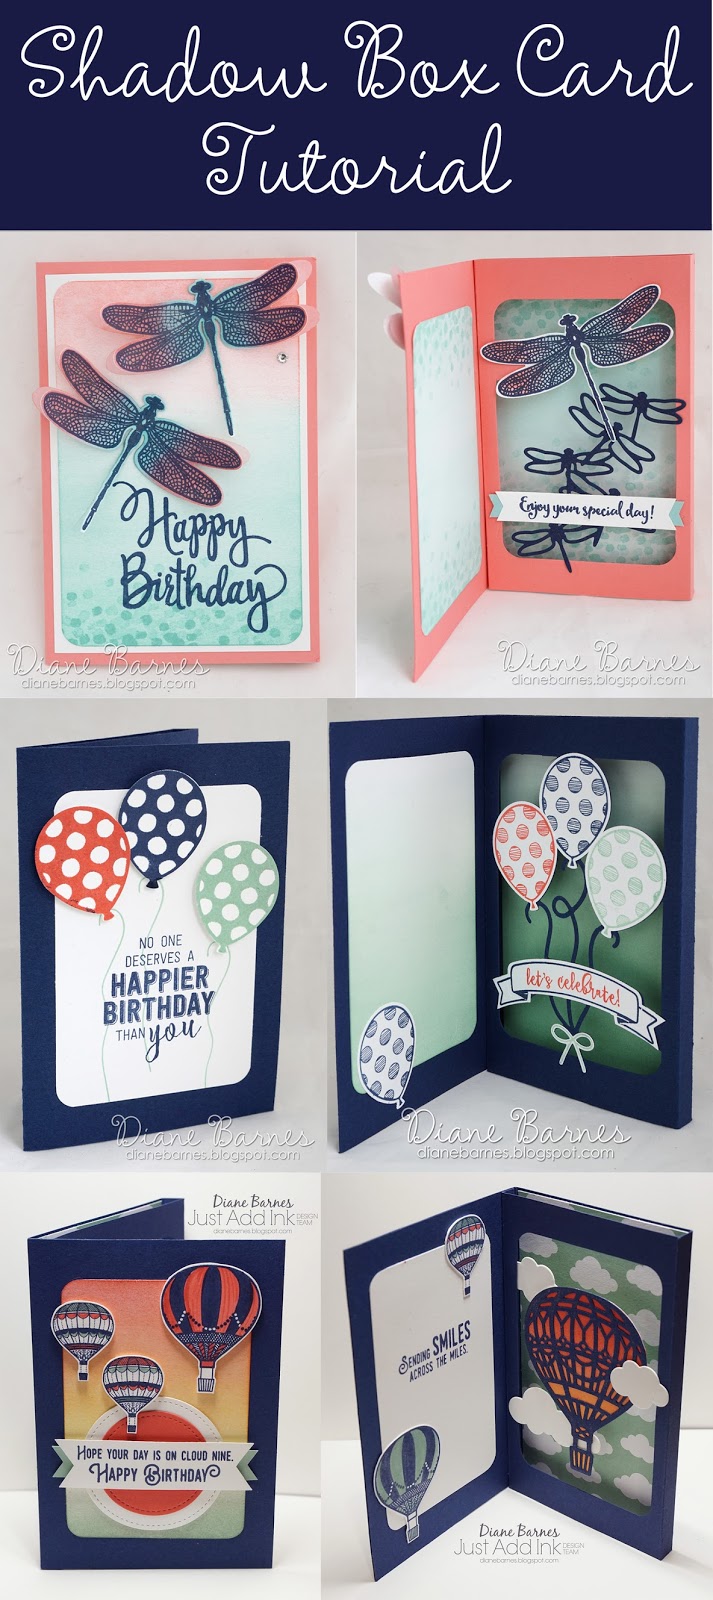 colour me happy: More shadow box cards & a tutorial for you